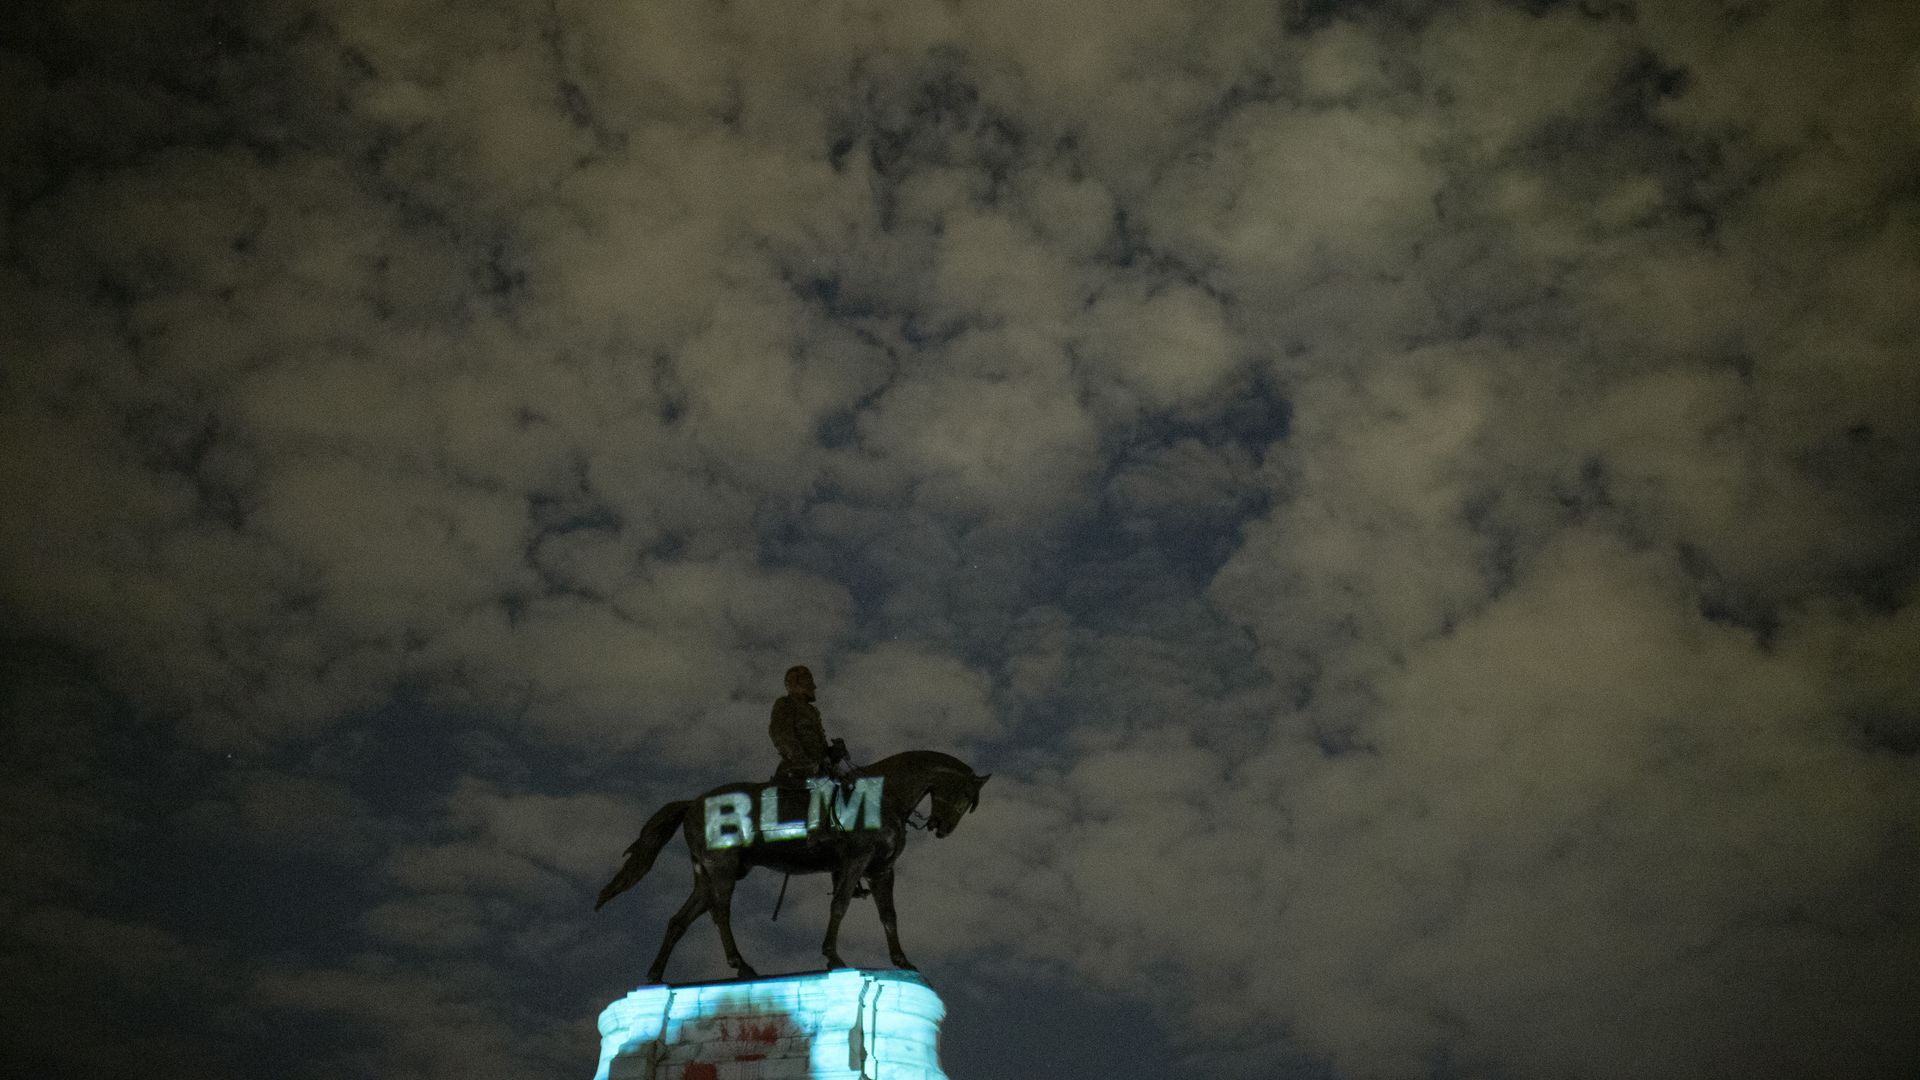 Night time scene as the letters for "Black Lives Matter" are projected onto the Robert E. Lee Statue on Monument Avenue in Richmond, VA on June 18, 2020 